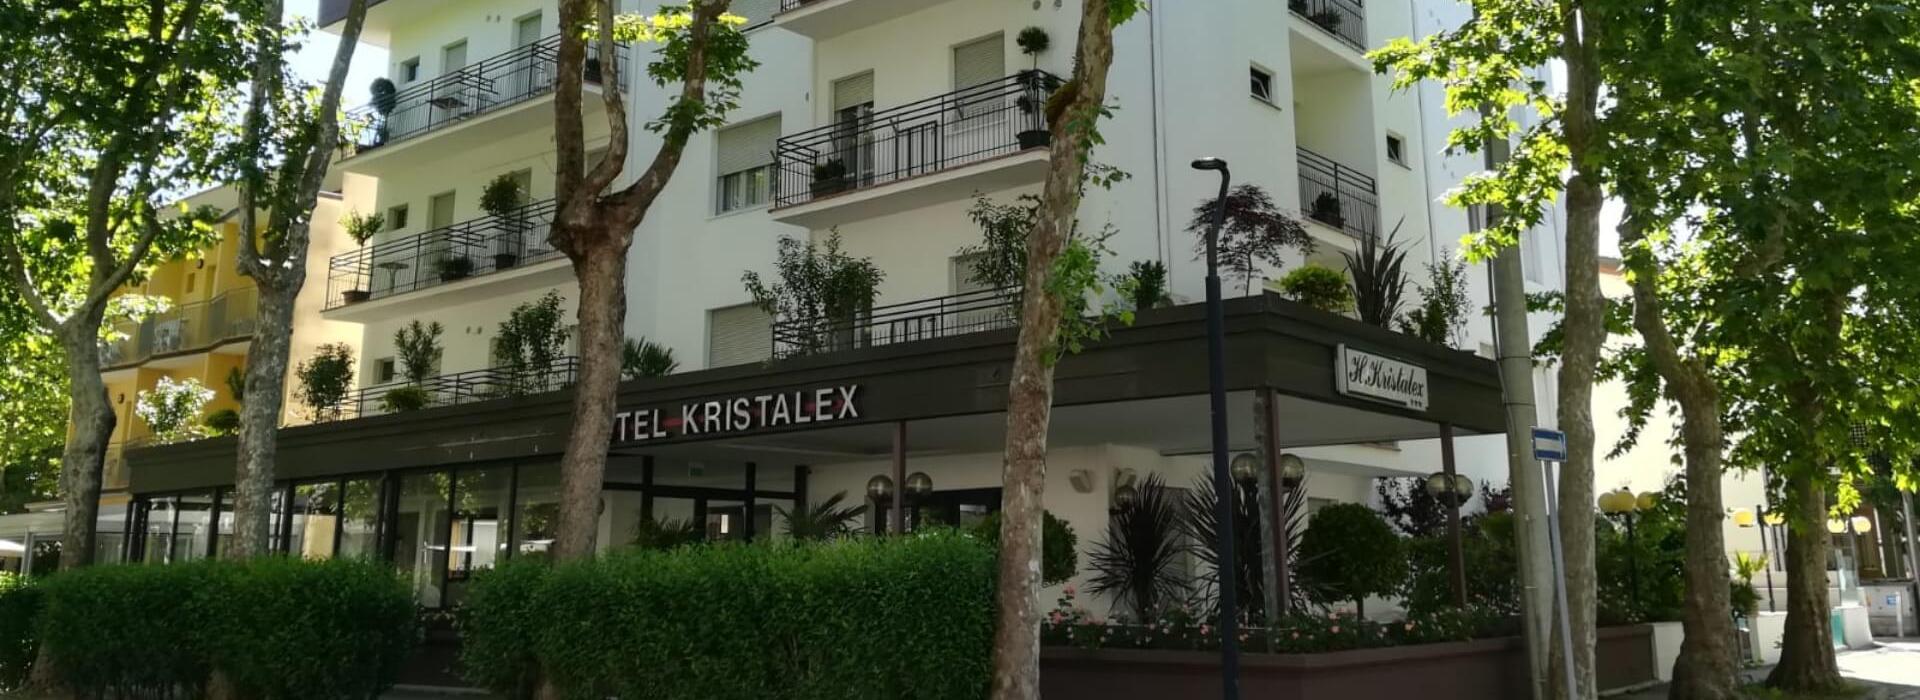 hotelkristalex en stay-with-dog-trainer-service-in-a-pet-friendly-hotel-in-cesenatico 017